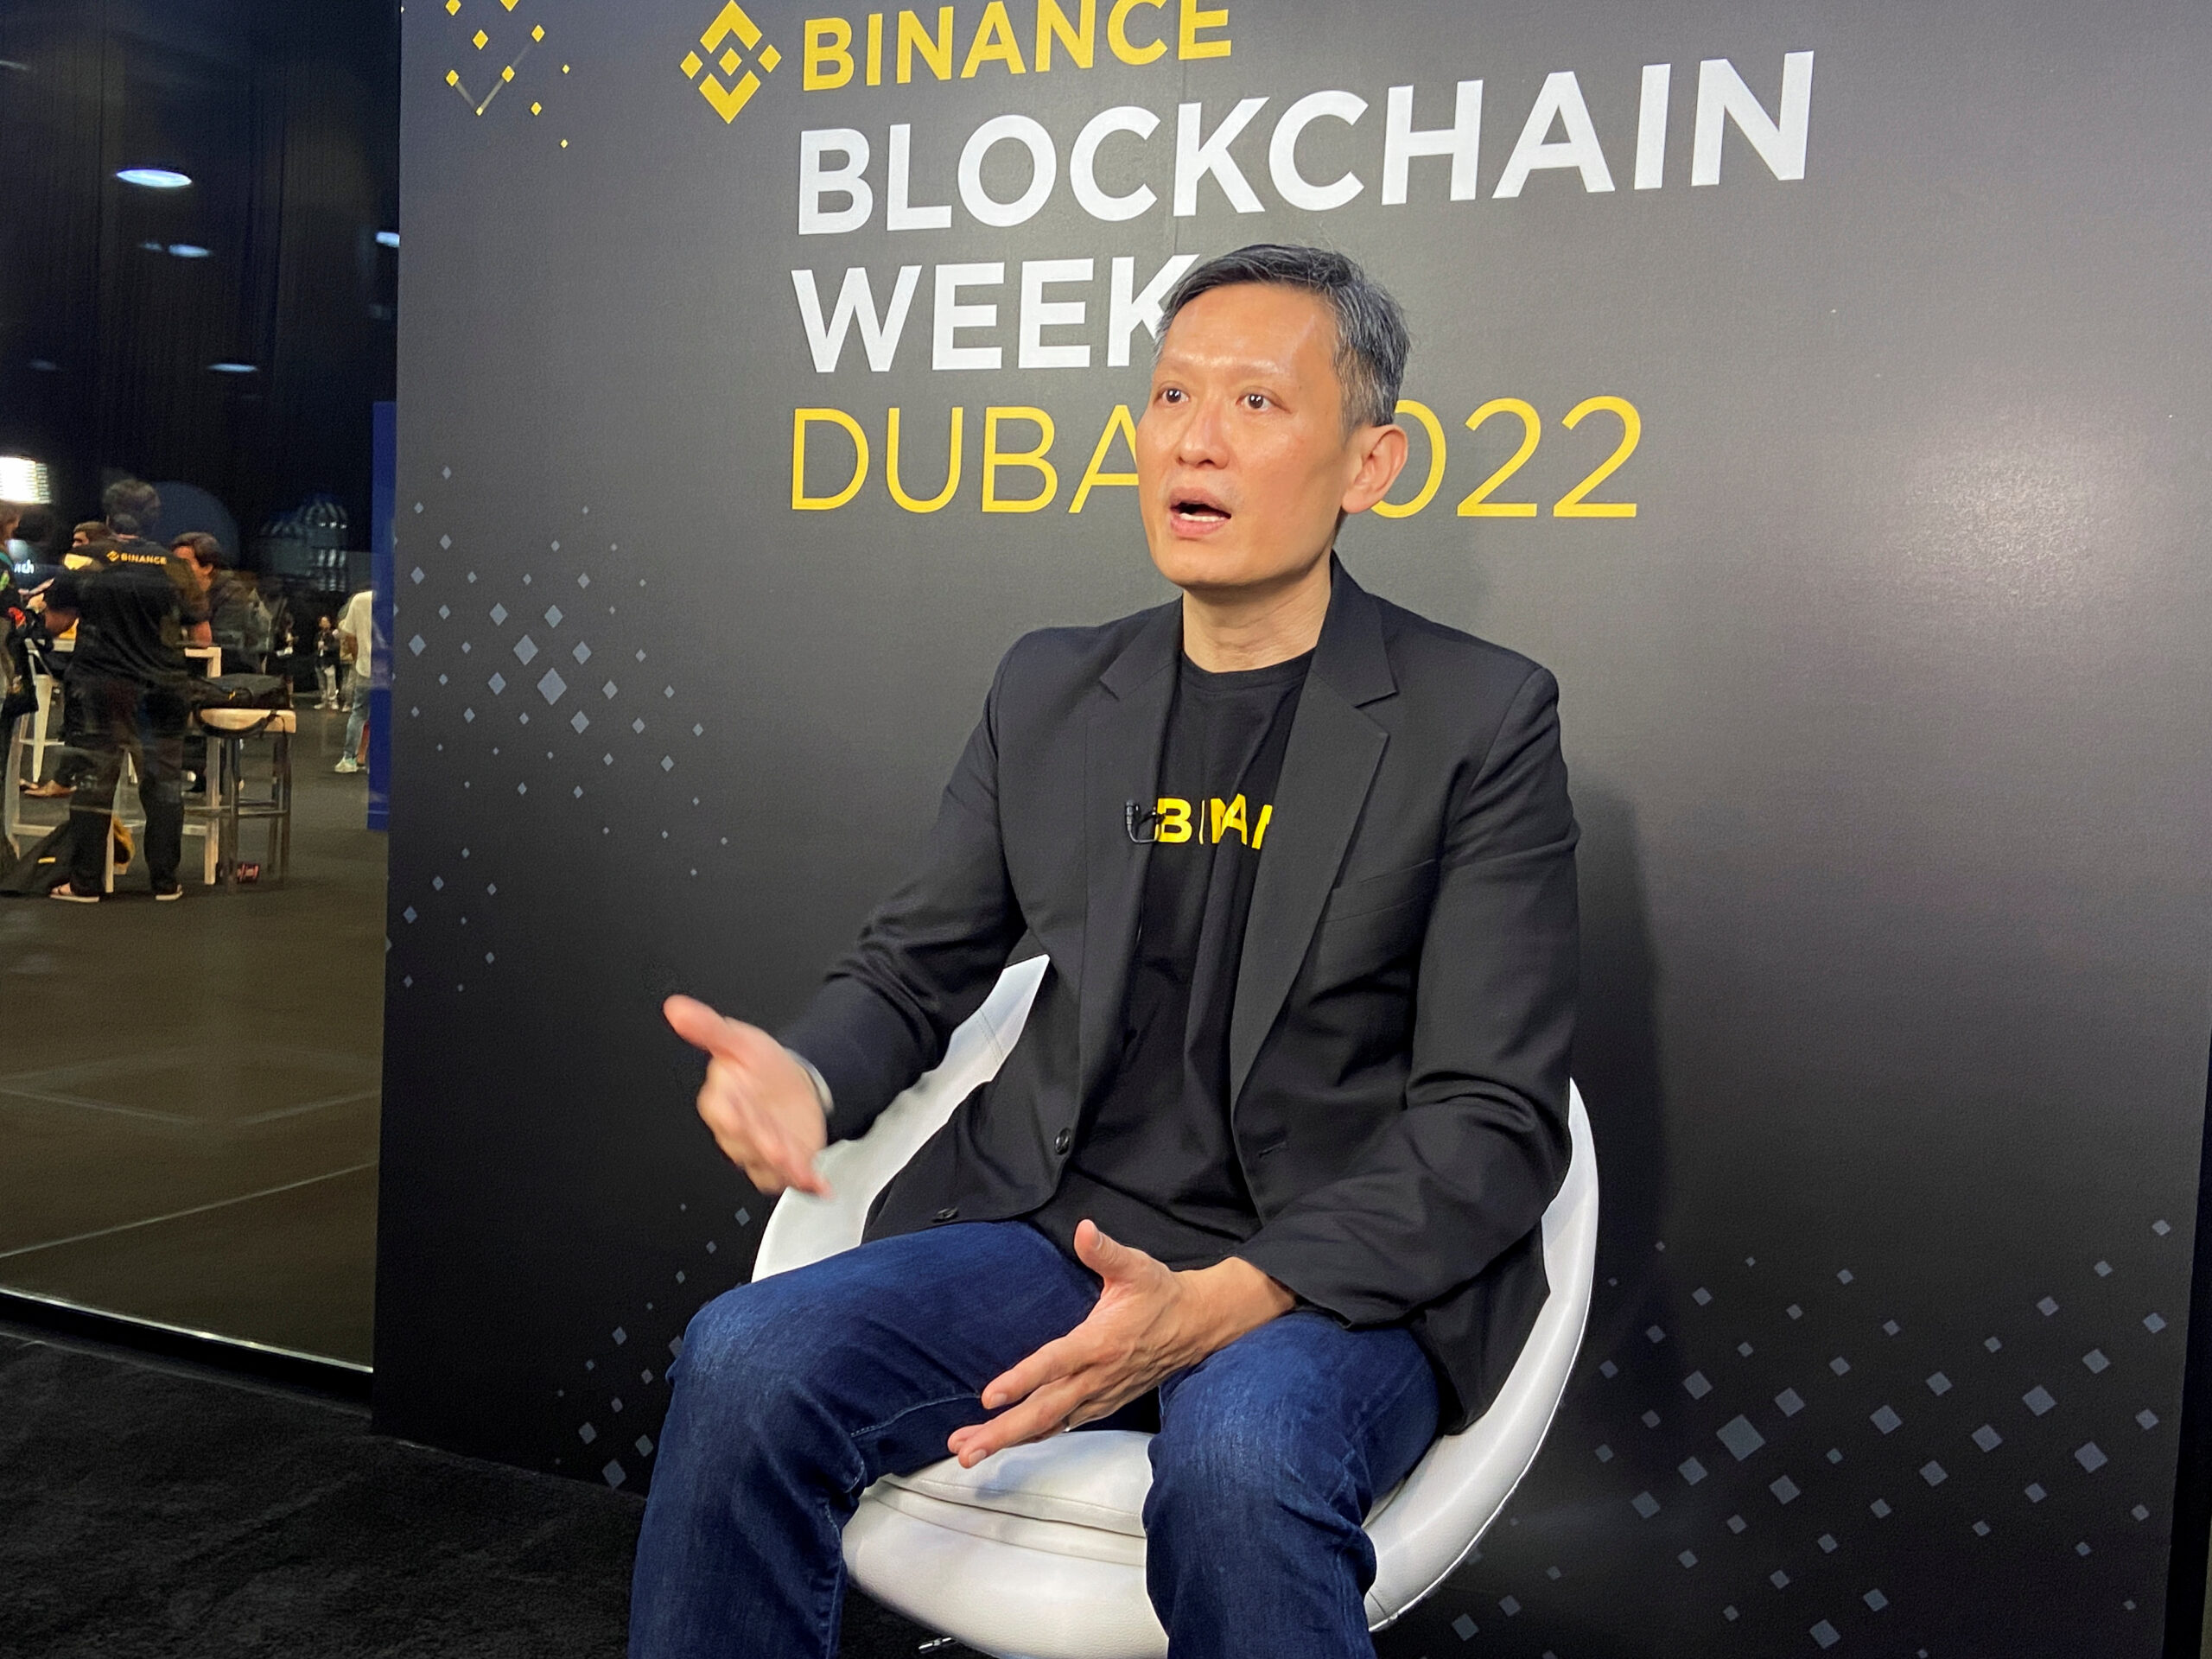 Eyes on Richard Teng as Potential Successor to Binance Founder Zhao